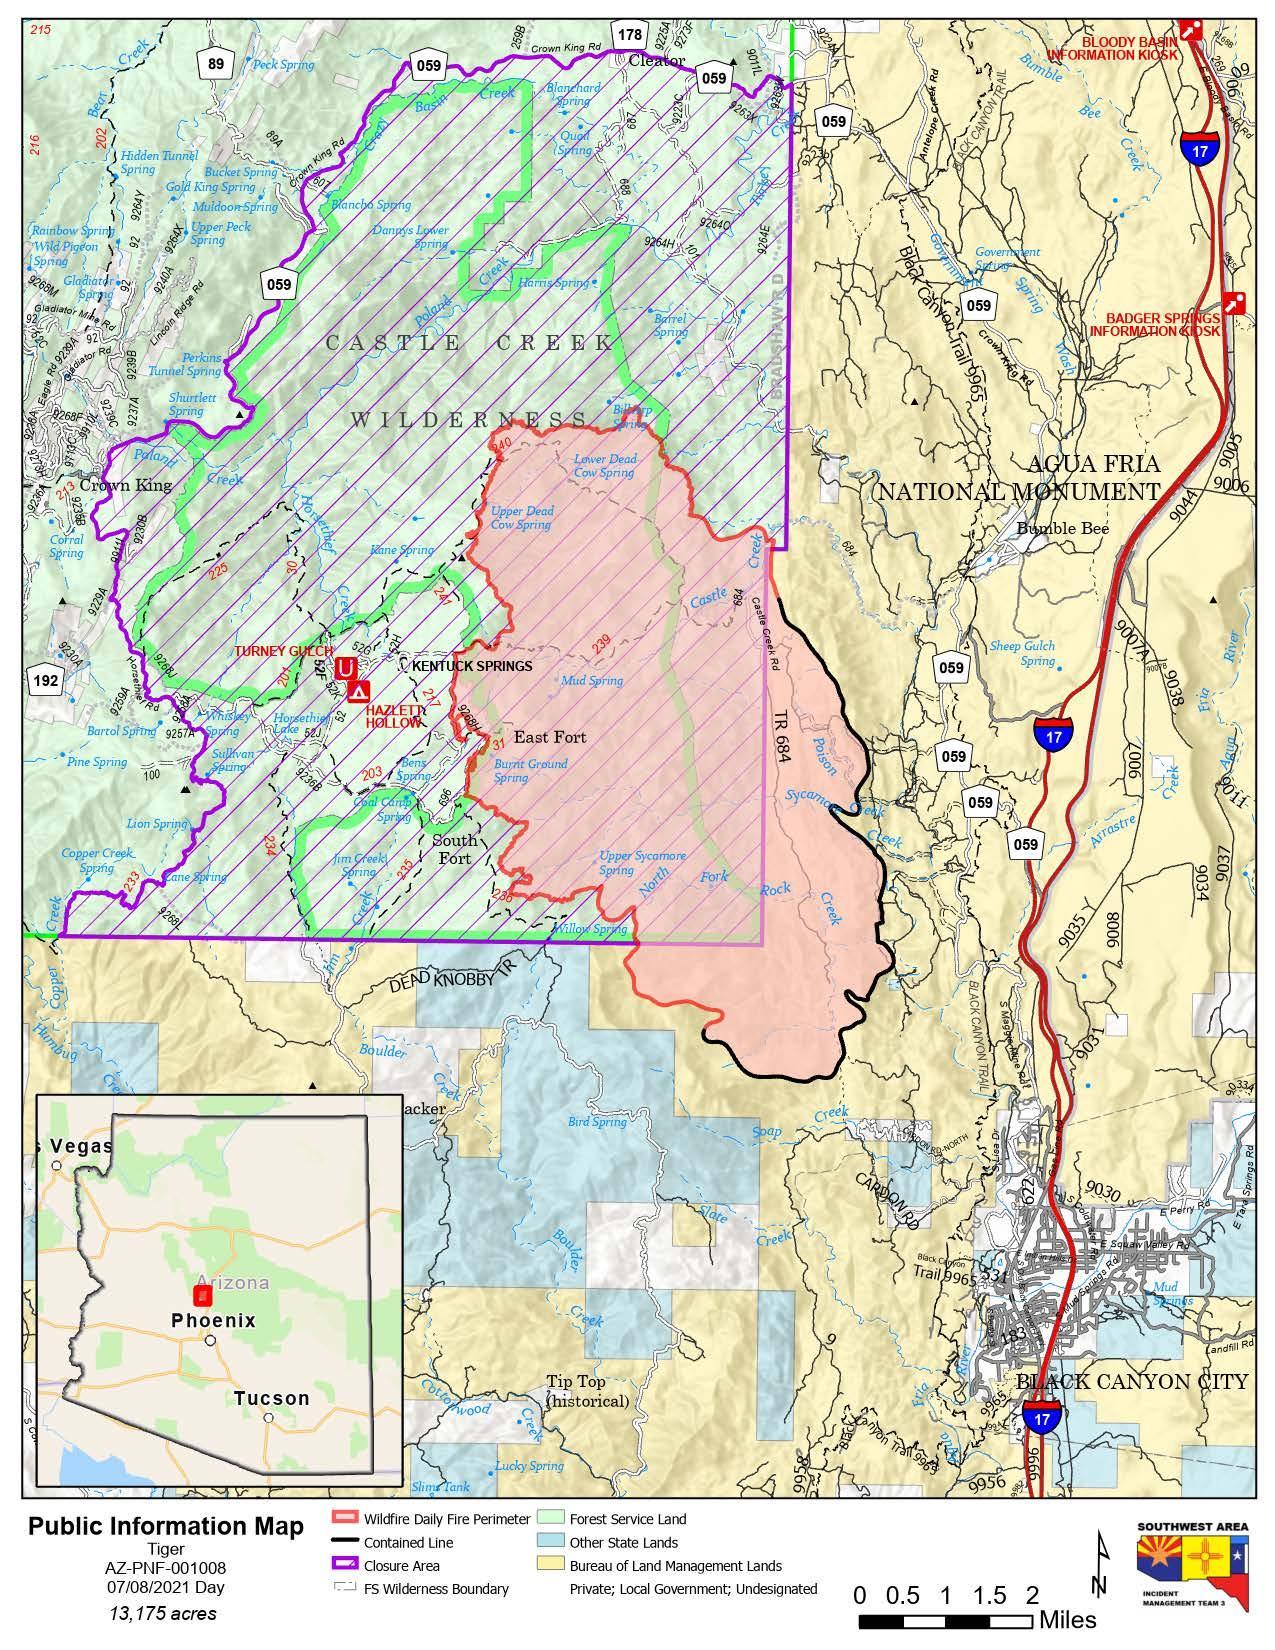 Tiger Fire Public Information Map 7-8-21